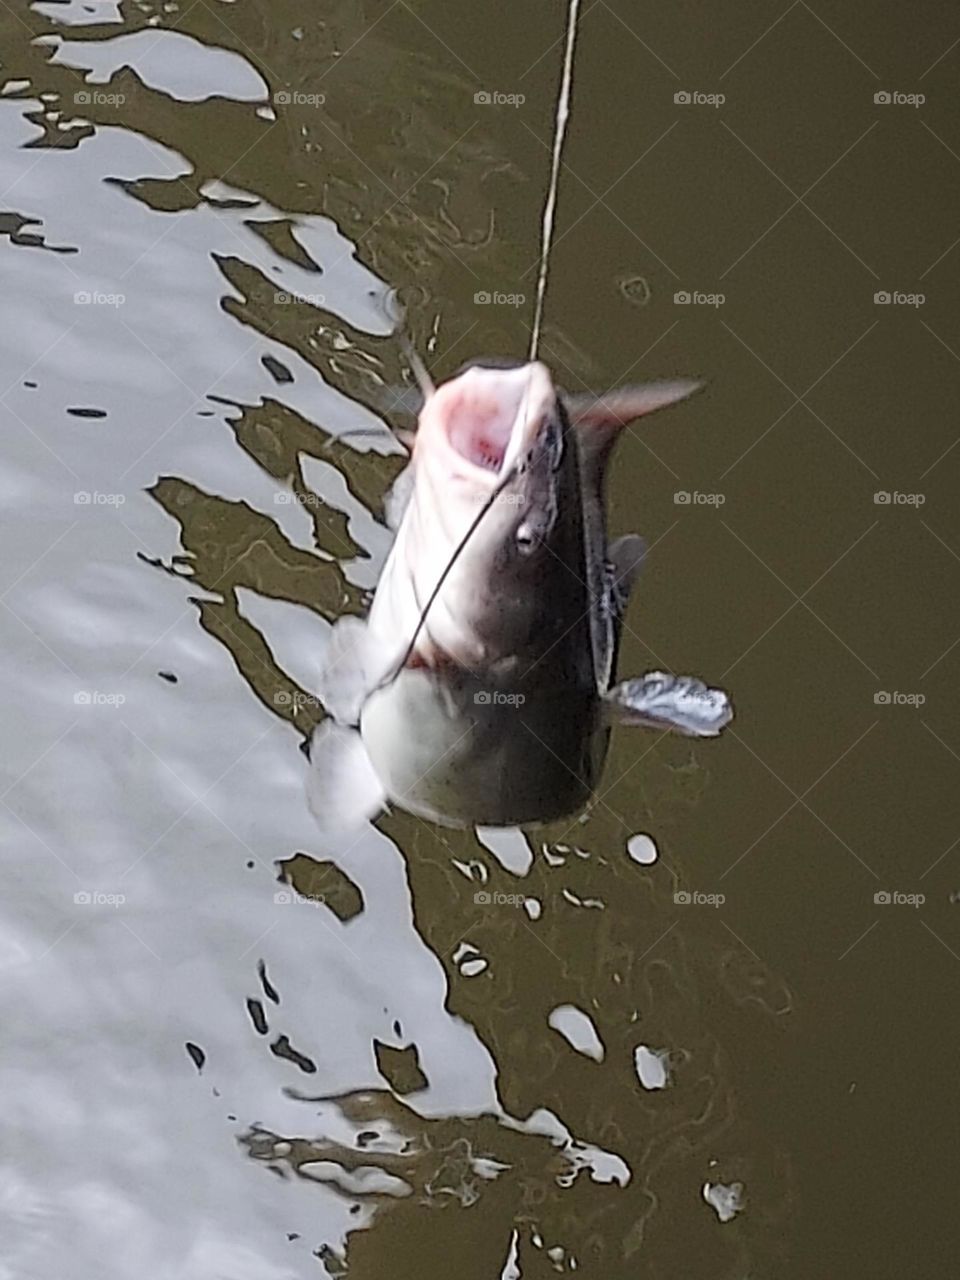 this is the first and biggest catfish caught today! awesome catch my friend,  way to go.